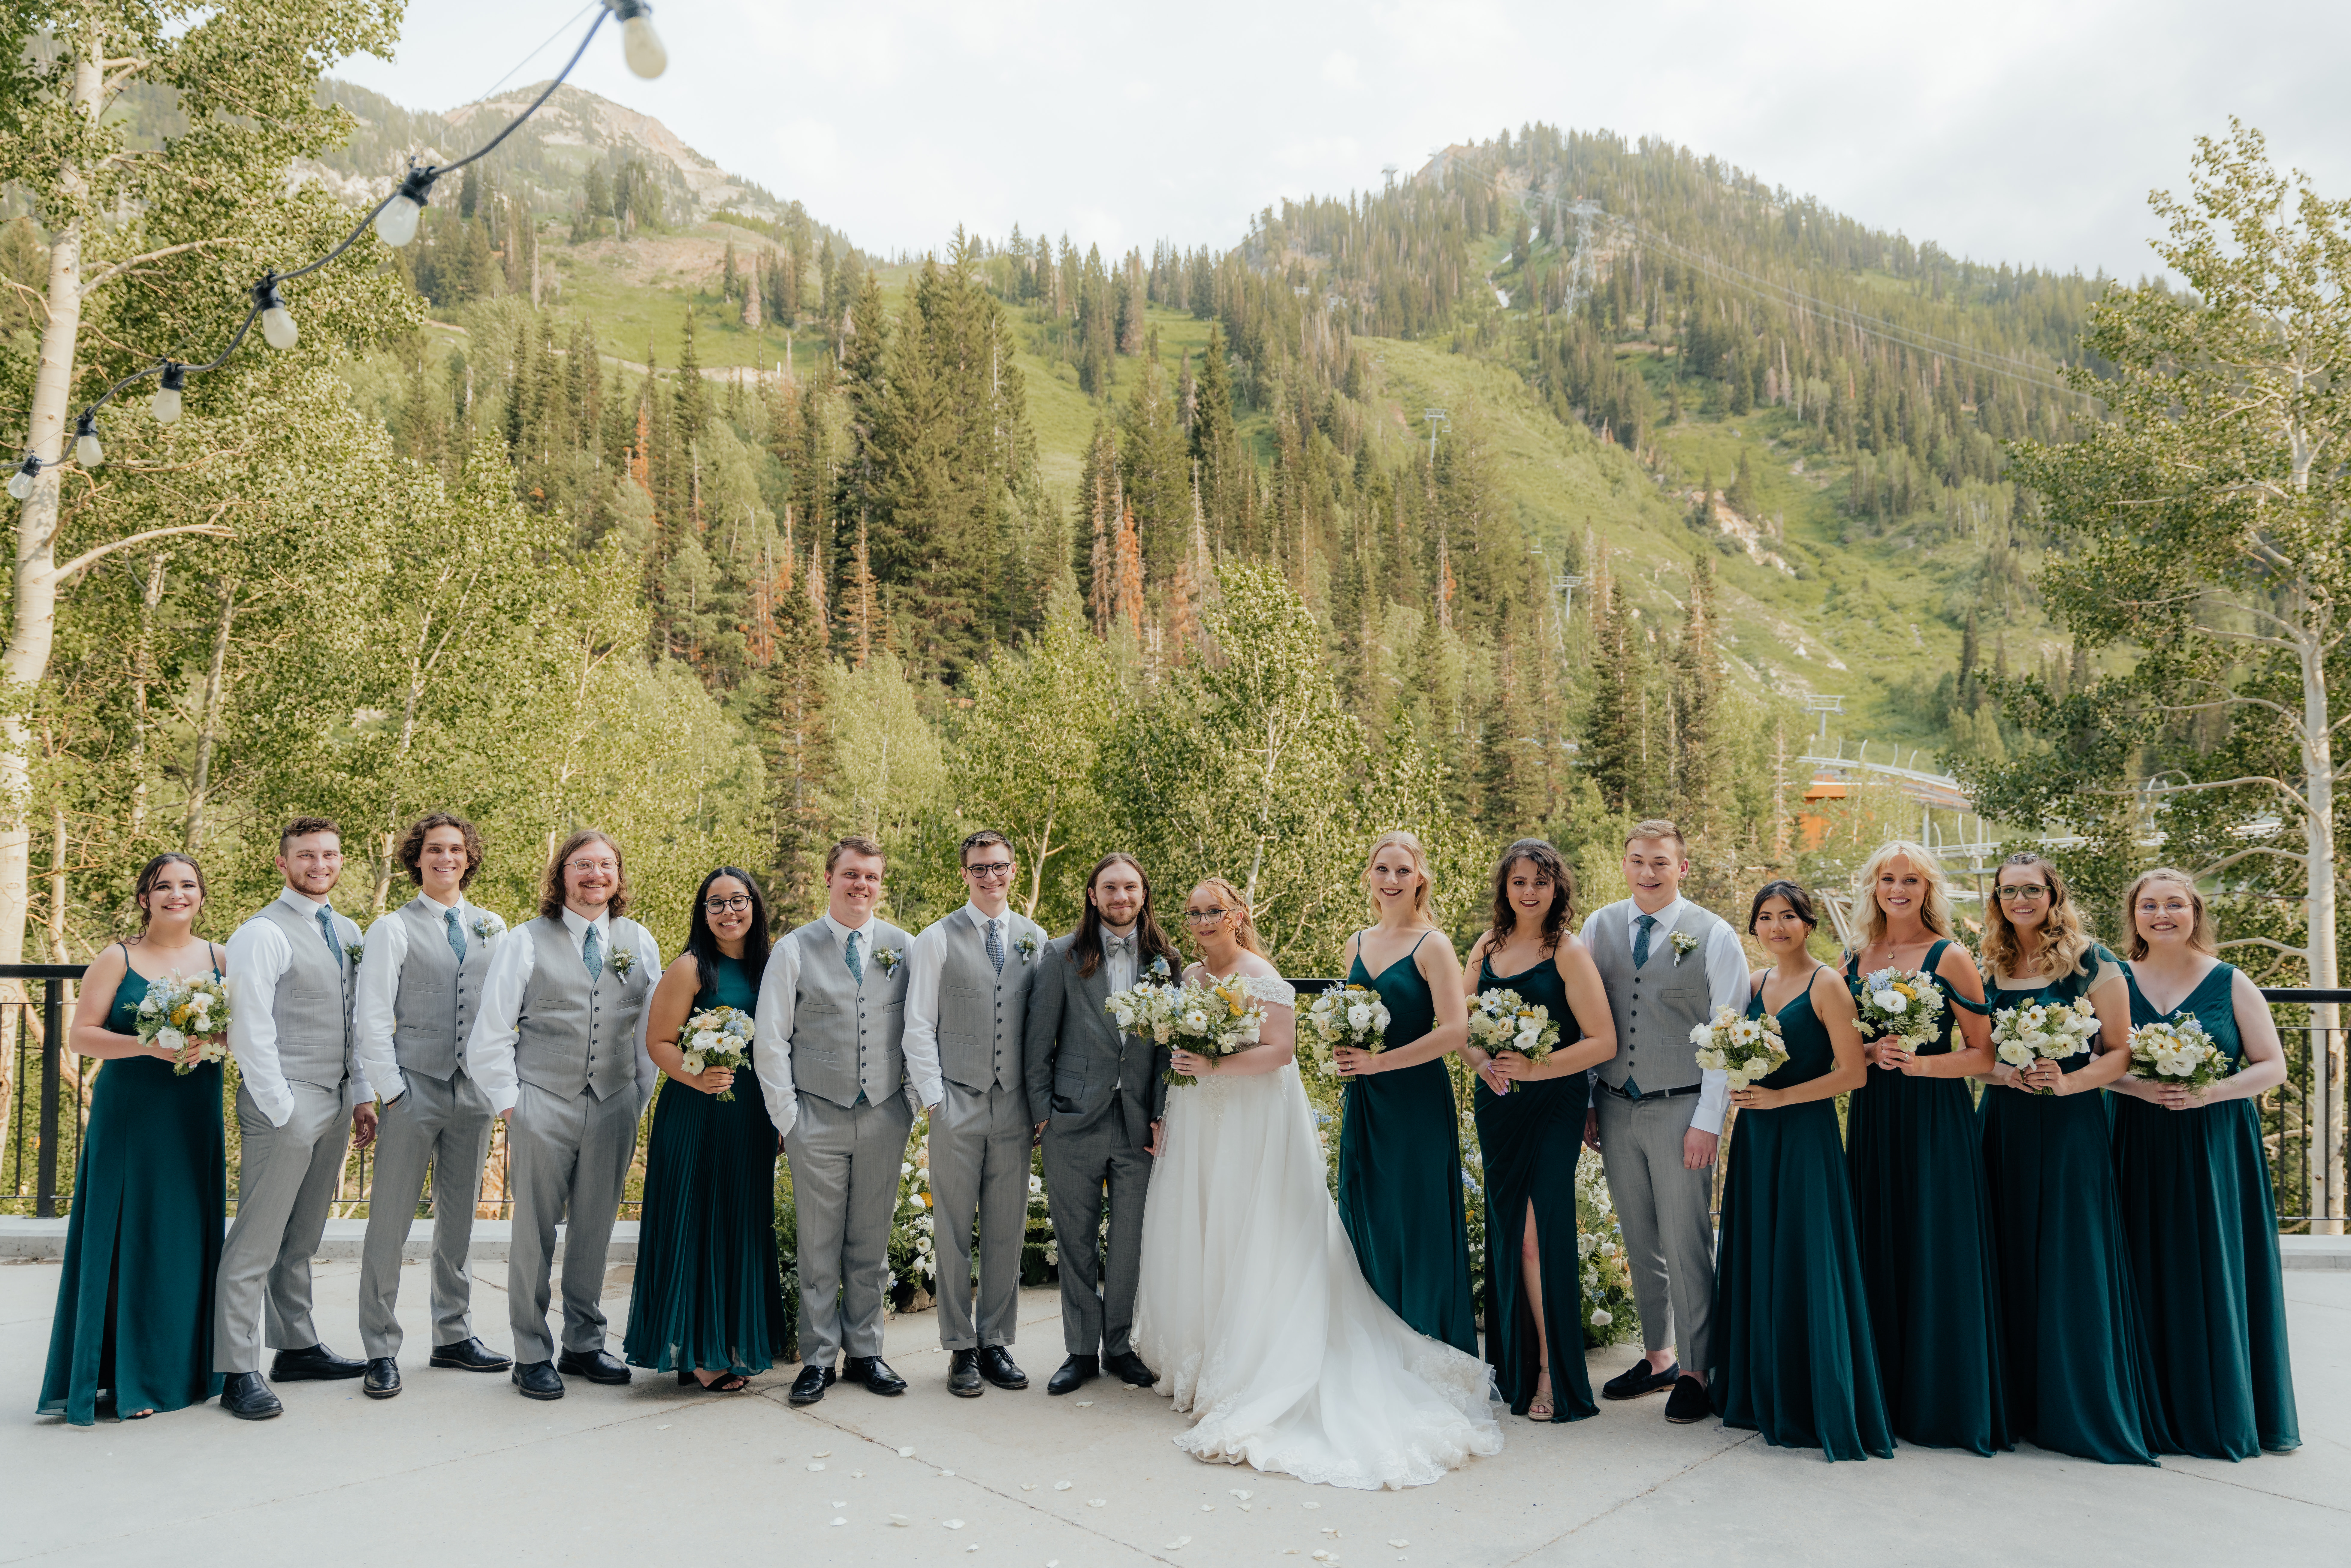 A wedding party of people in deep green dresses and grey suites smile for the camera while standing in front of a nest of wildflowers and mountain trees as their backdrop.